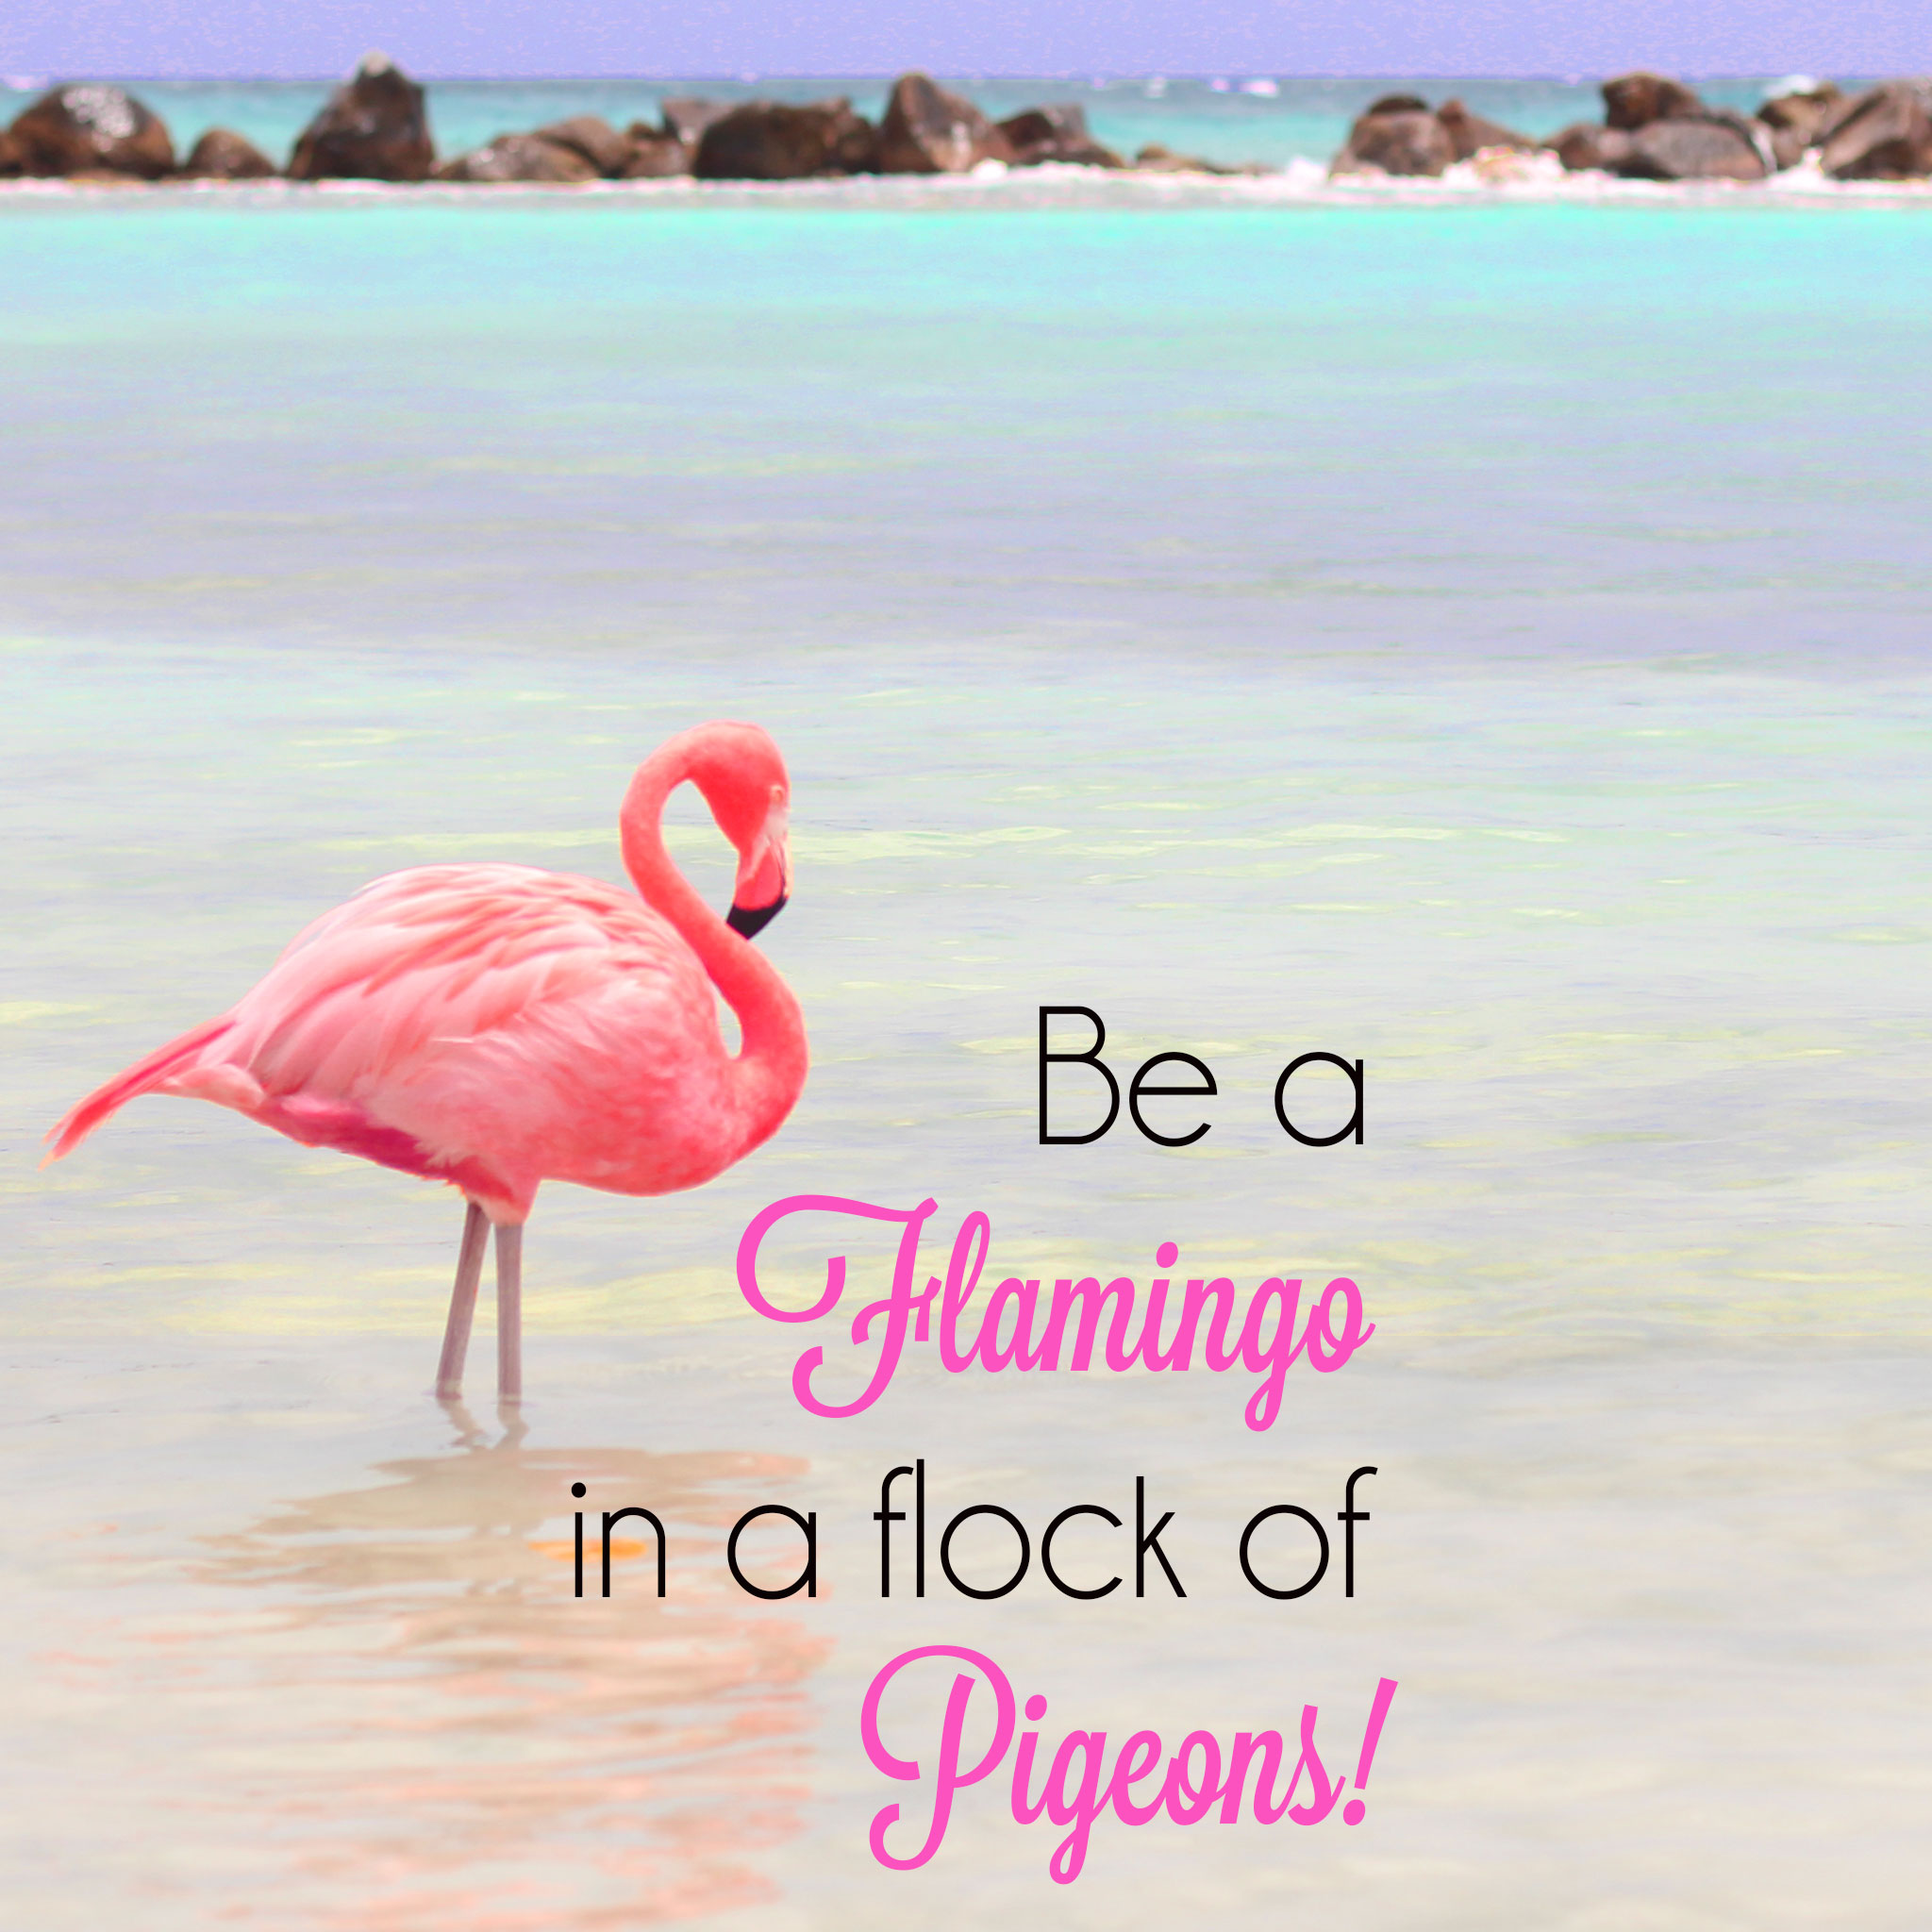 Be A Flamingo In A Flock Of Pigeons Ipad Wallpaper - Flamingo In A Flock Of Pigeons Meaning - HD Wallpaper 